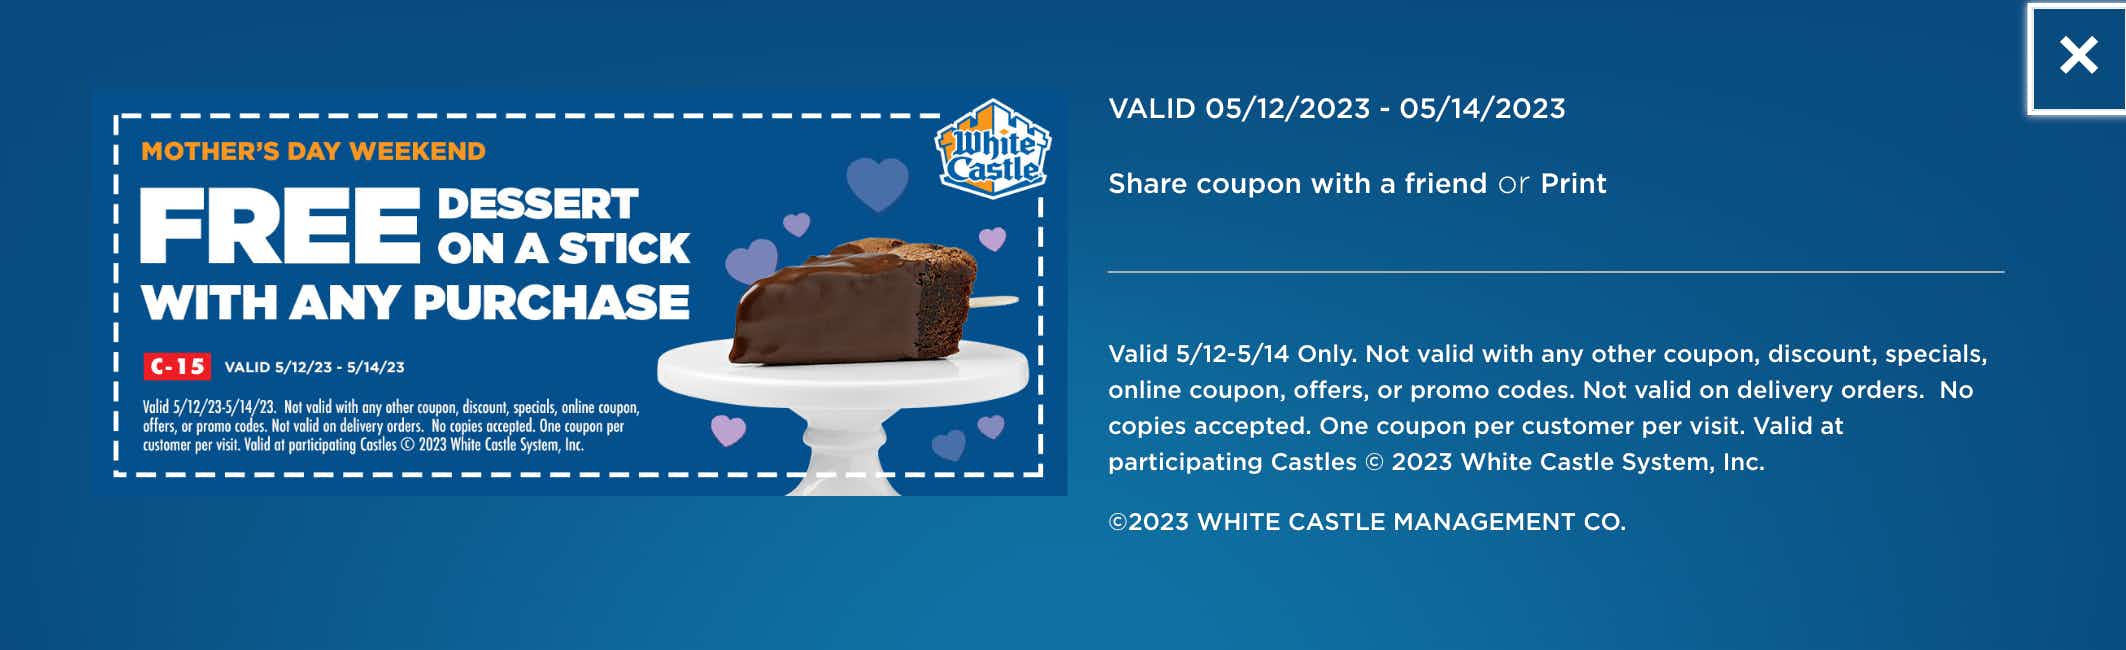 https://prod-cdn-thekrazycouponlady.imgix.net/wp-content/uploads/2017/05/white-castle-mothers-day-2023-1683955961-1683955961.png?auto=format&fit=fill&q=25